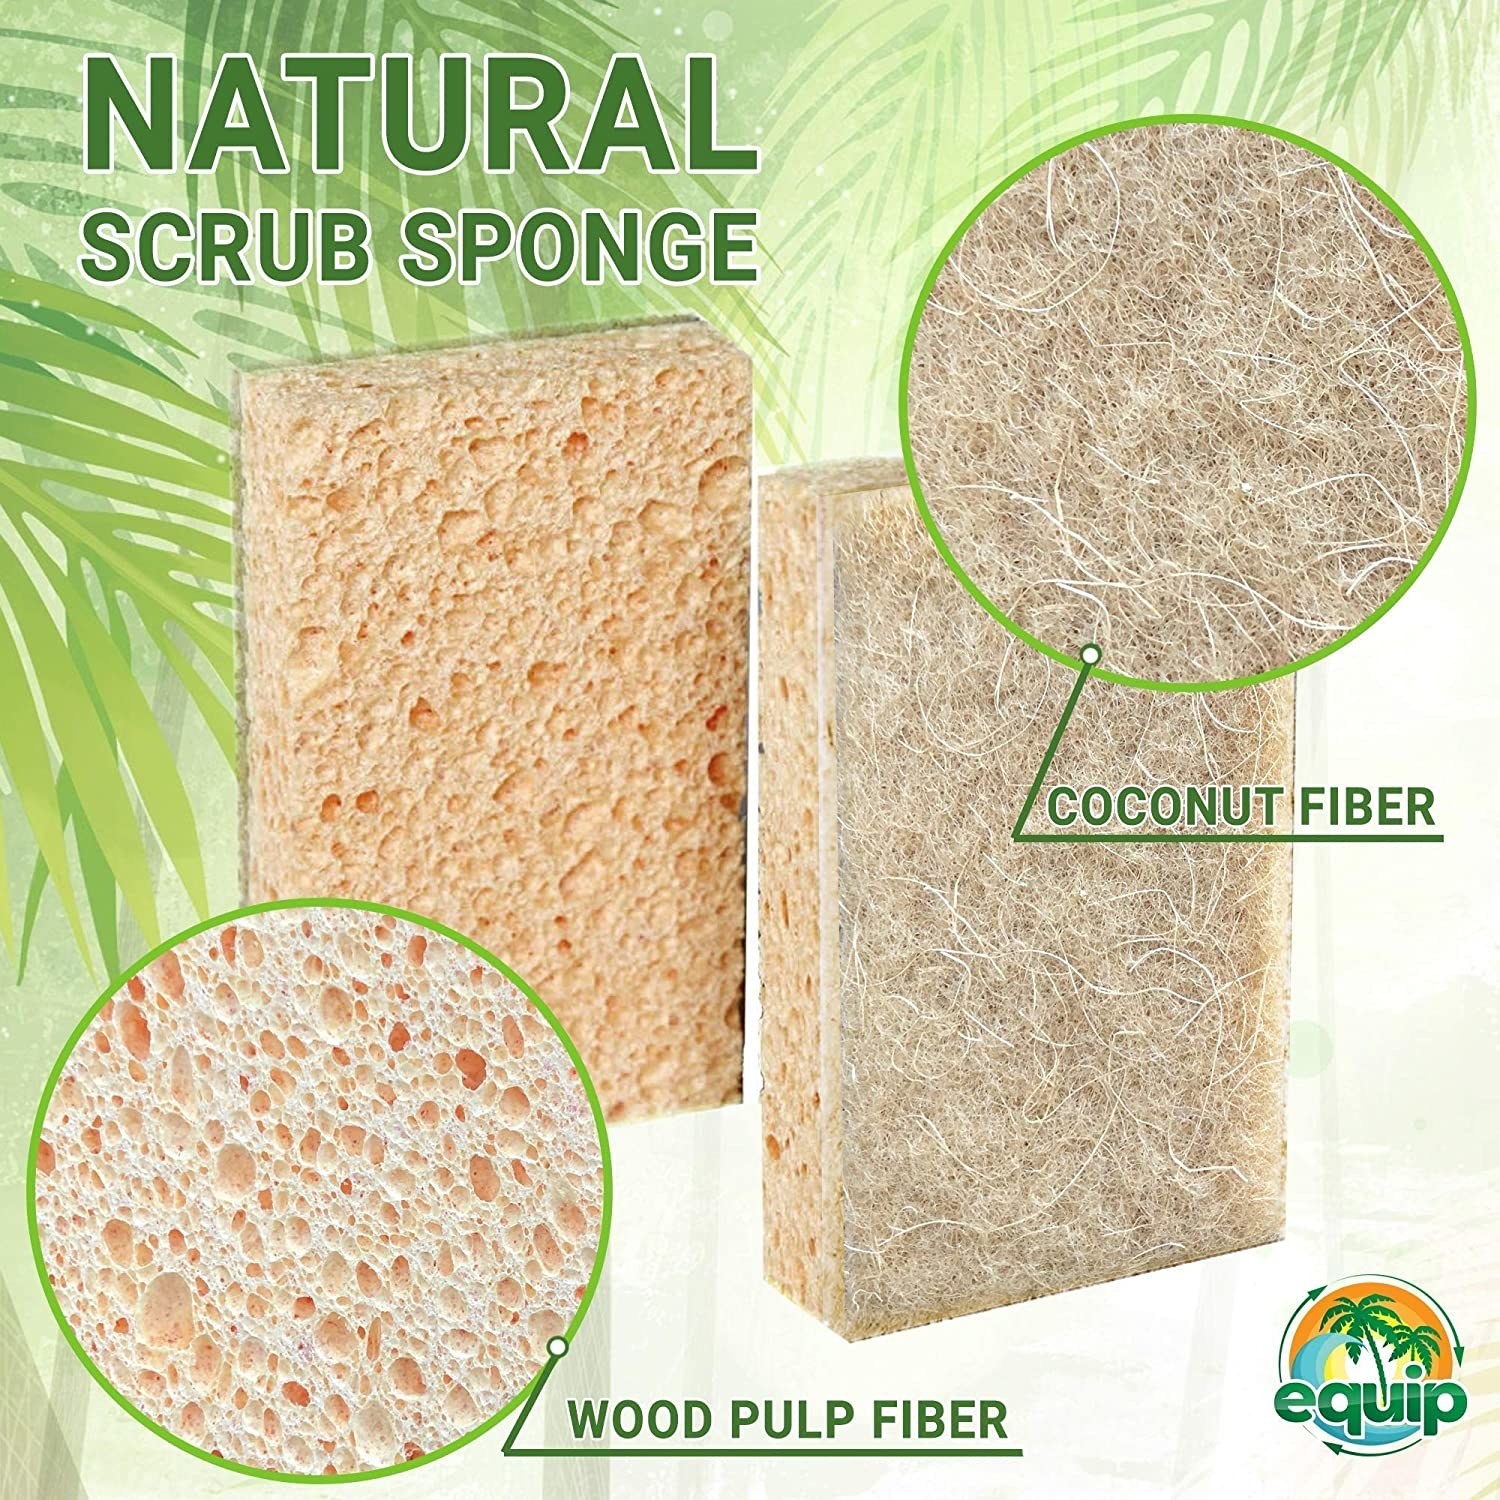 sponges made with wood pulp fiber and coconut fiber